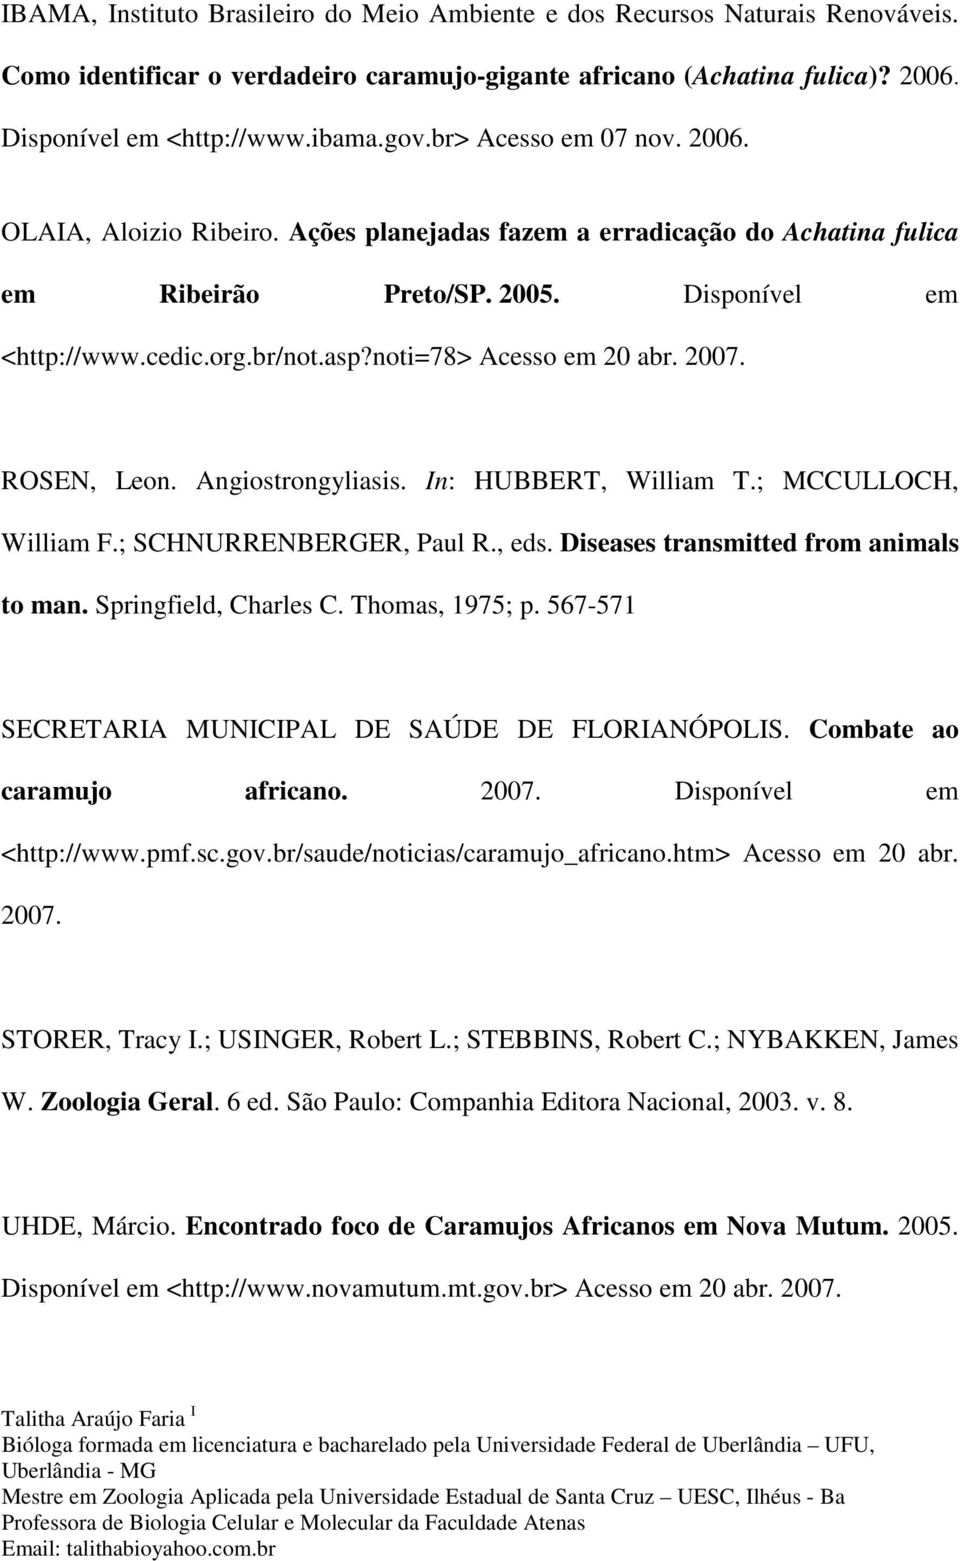 noti=78> Acesso em 20 abr. 2007. ROSEN, Leon. Angiostrongyliasis. In: HUBBERT, William T.; MCCULLOCH, William F.; SCHNURRENBERGER, Paul R., eds. Diseases transmitted from animals to man.